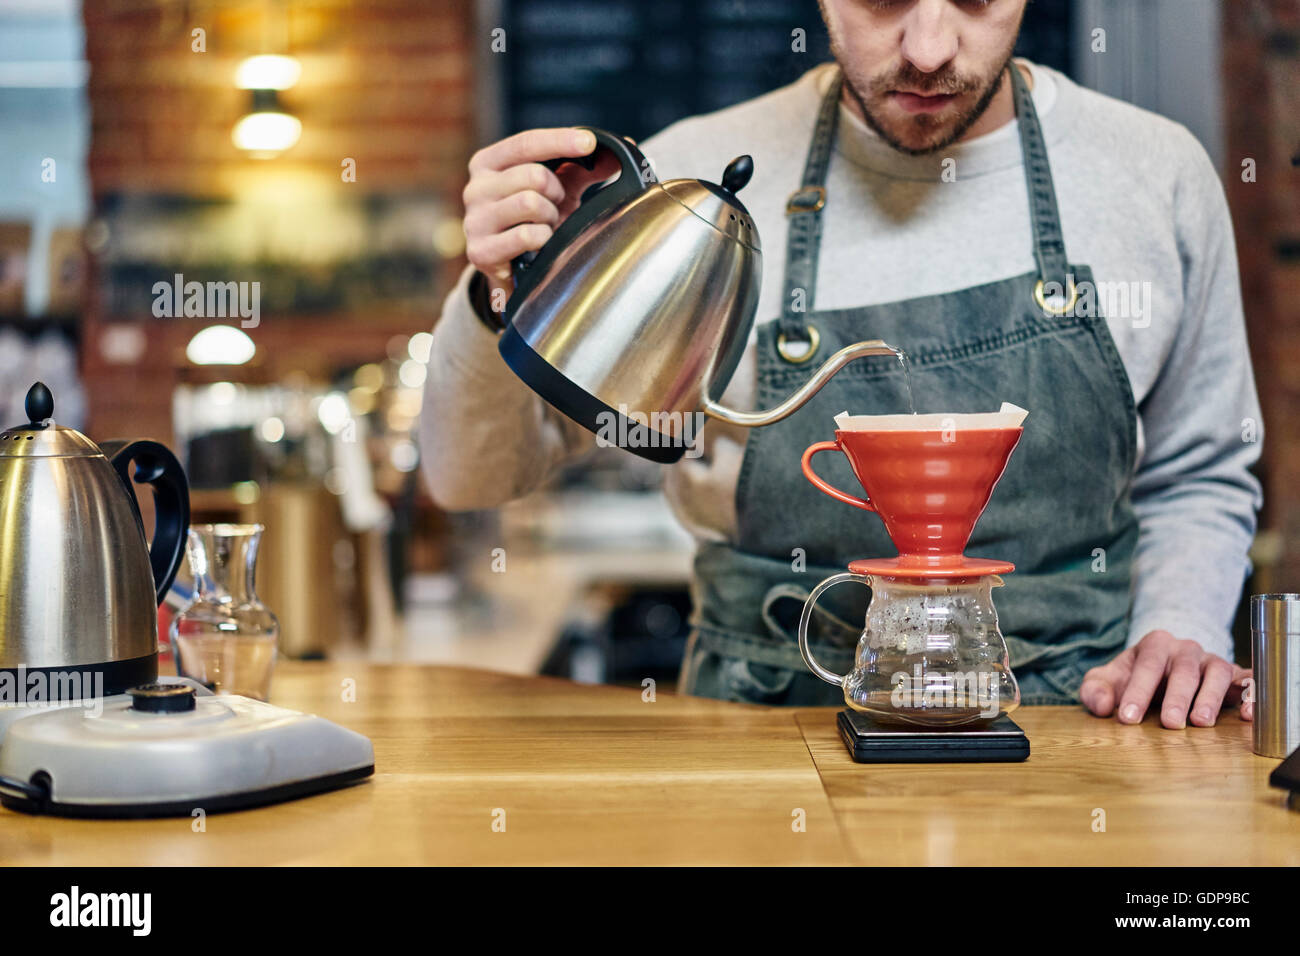 Barista pouring boiling water into coffee filter at coffee shop Stock Photo